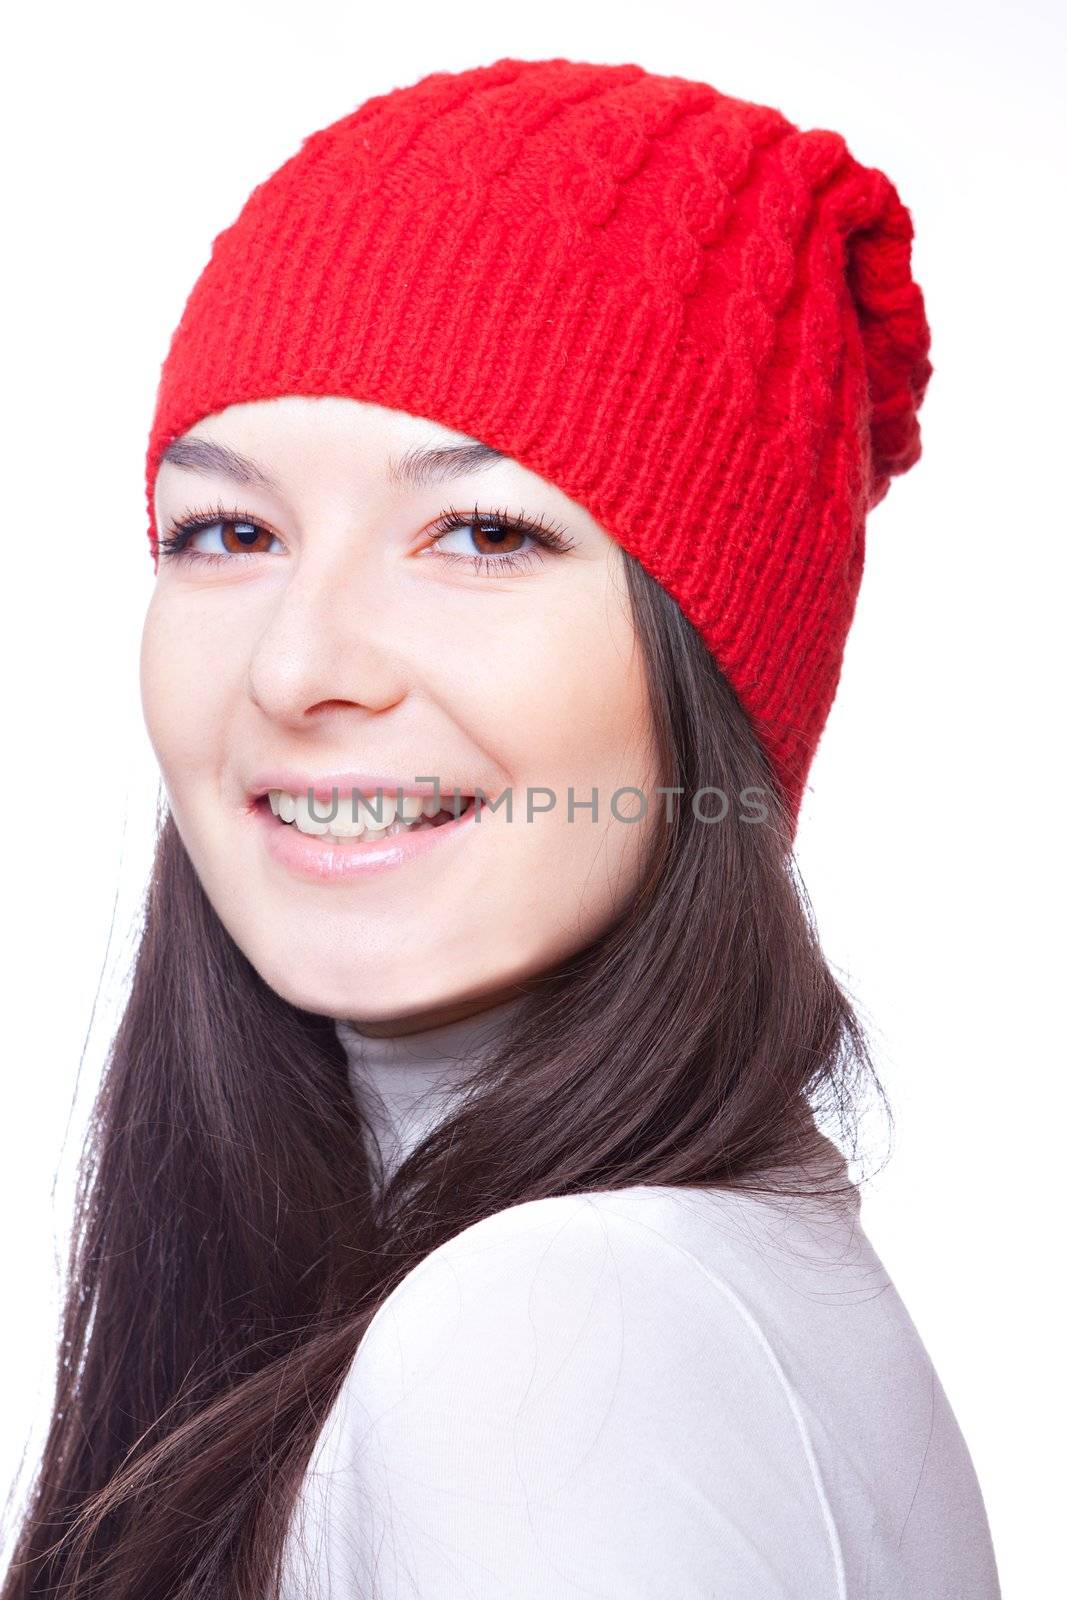 the face of a beautiful girl in a red cap